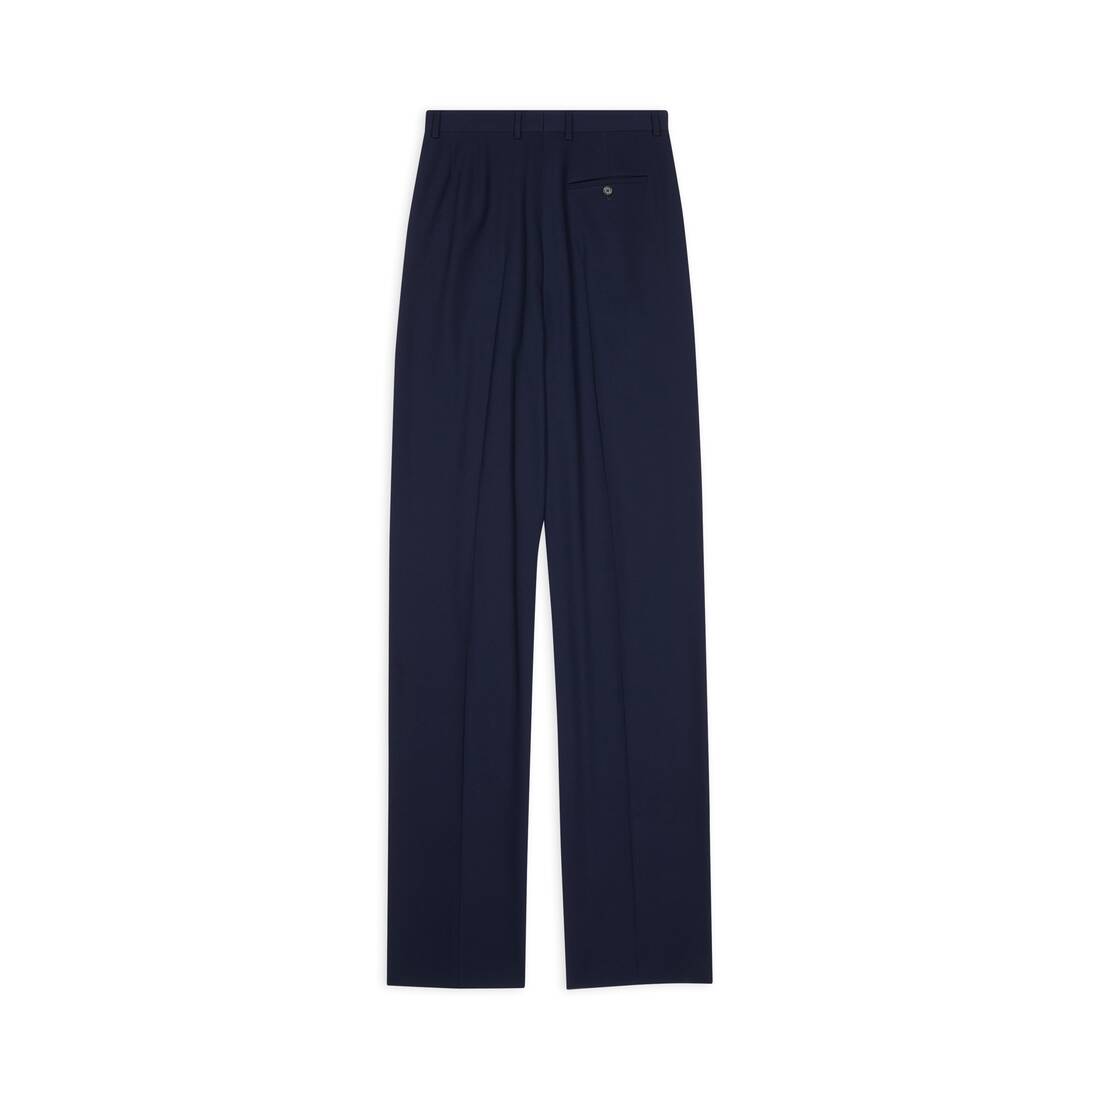 Men's Large Fit Tailored Pants in Navy Blue